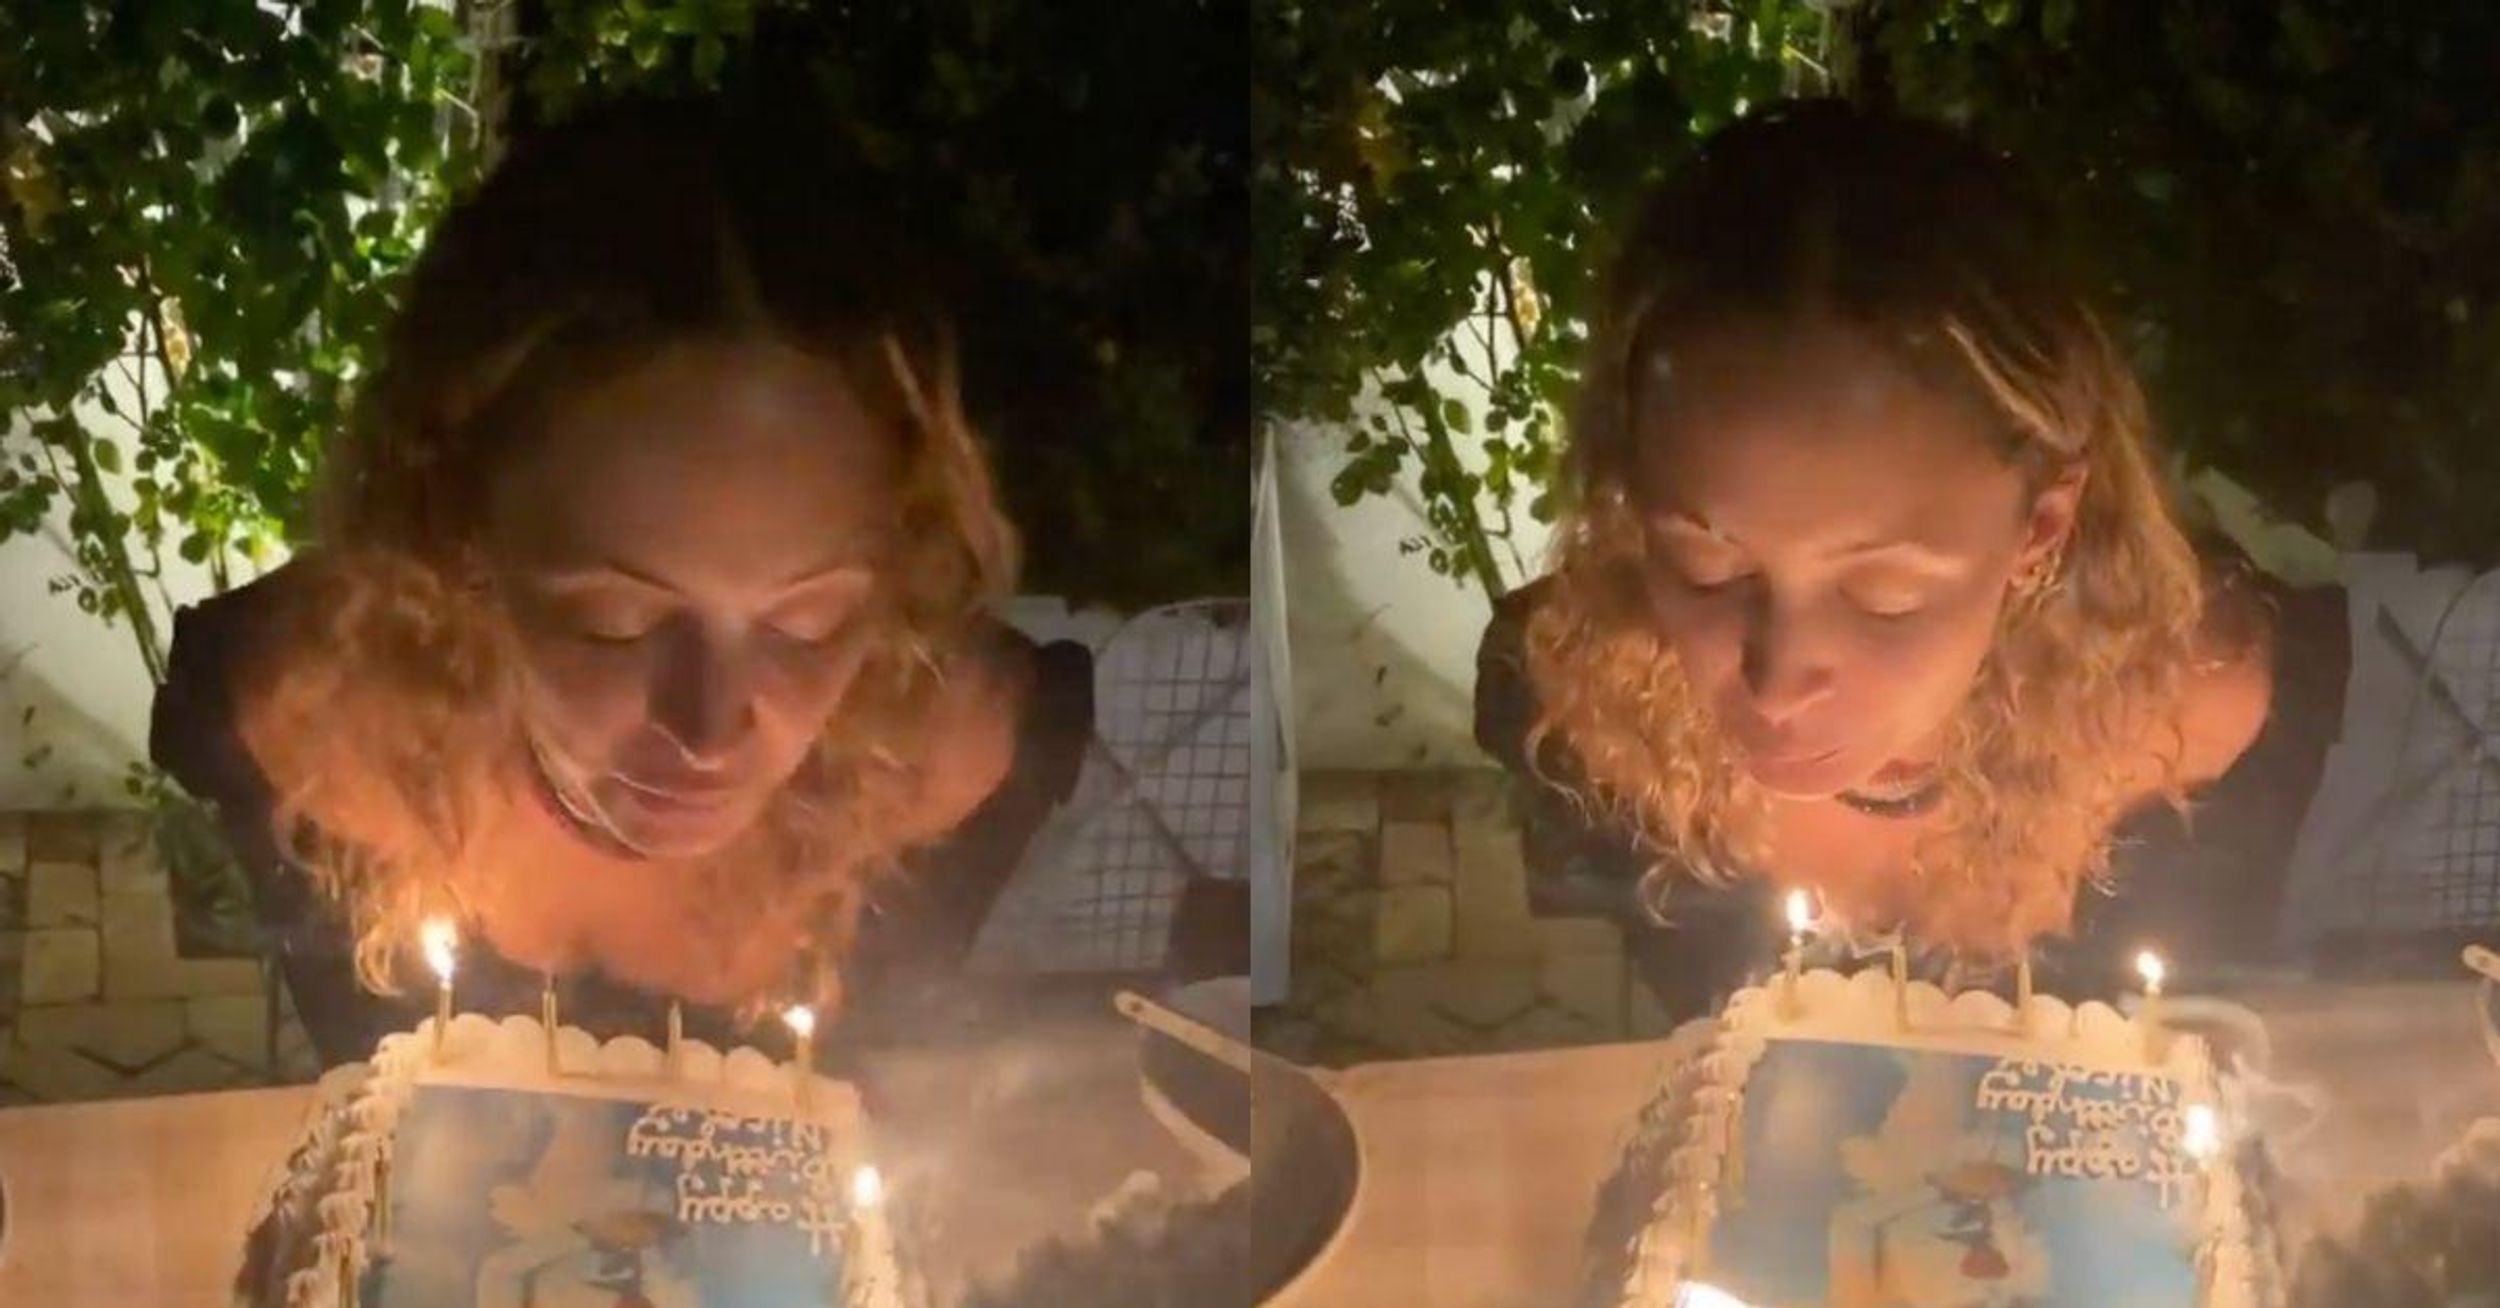 Nicole Richie Shares Scary Video Of Her Hair Catching Fire While Blowing Out Birthday Candles